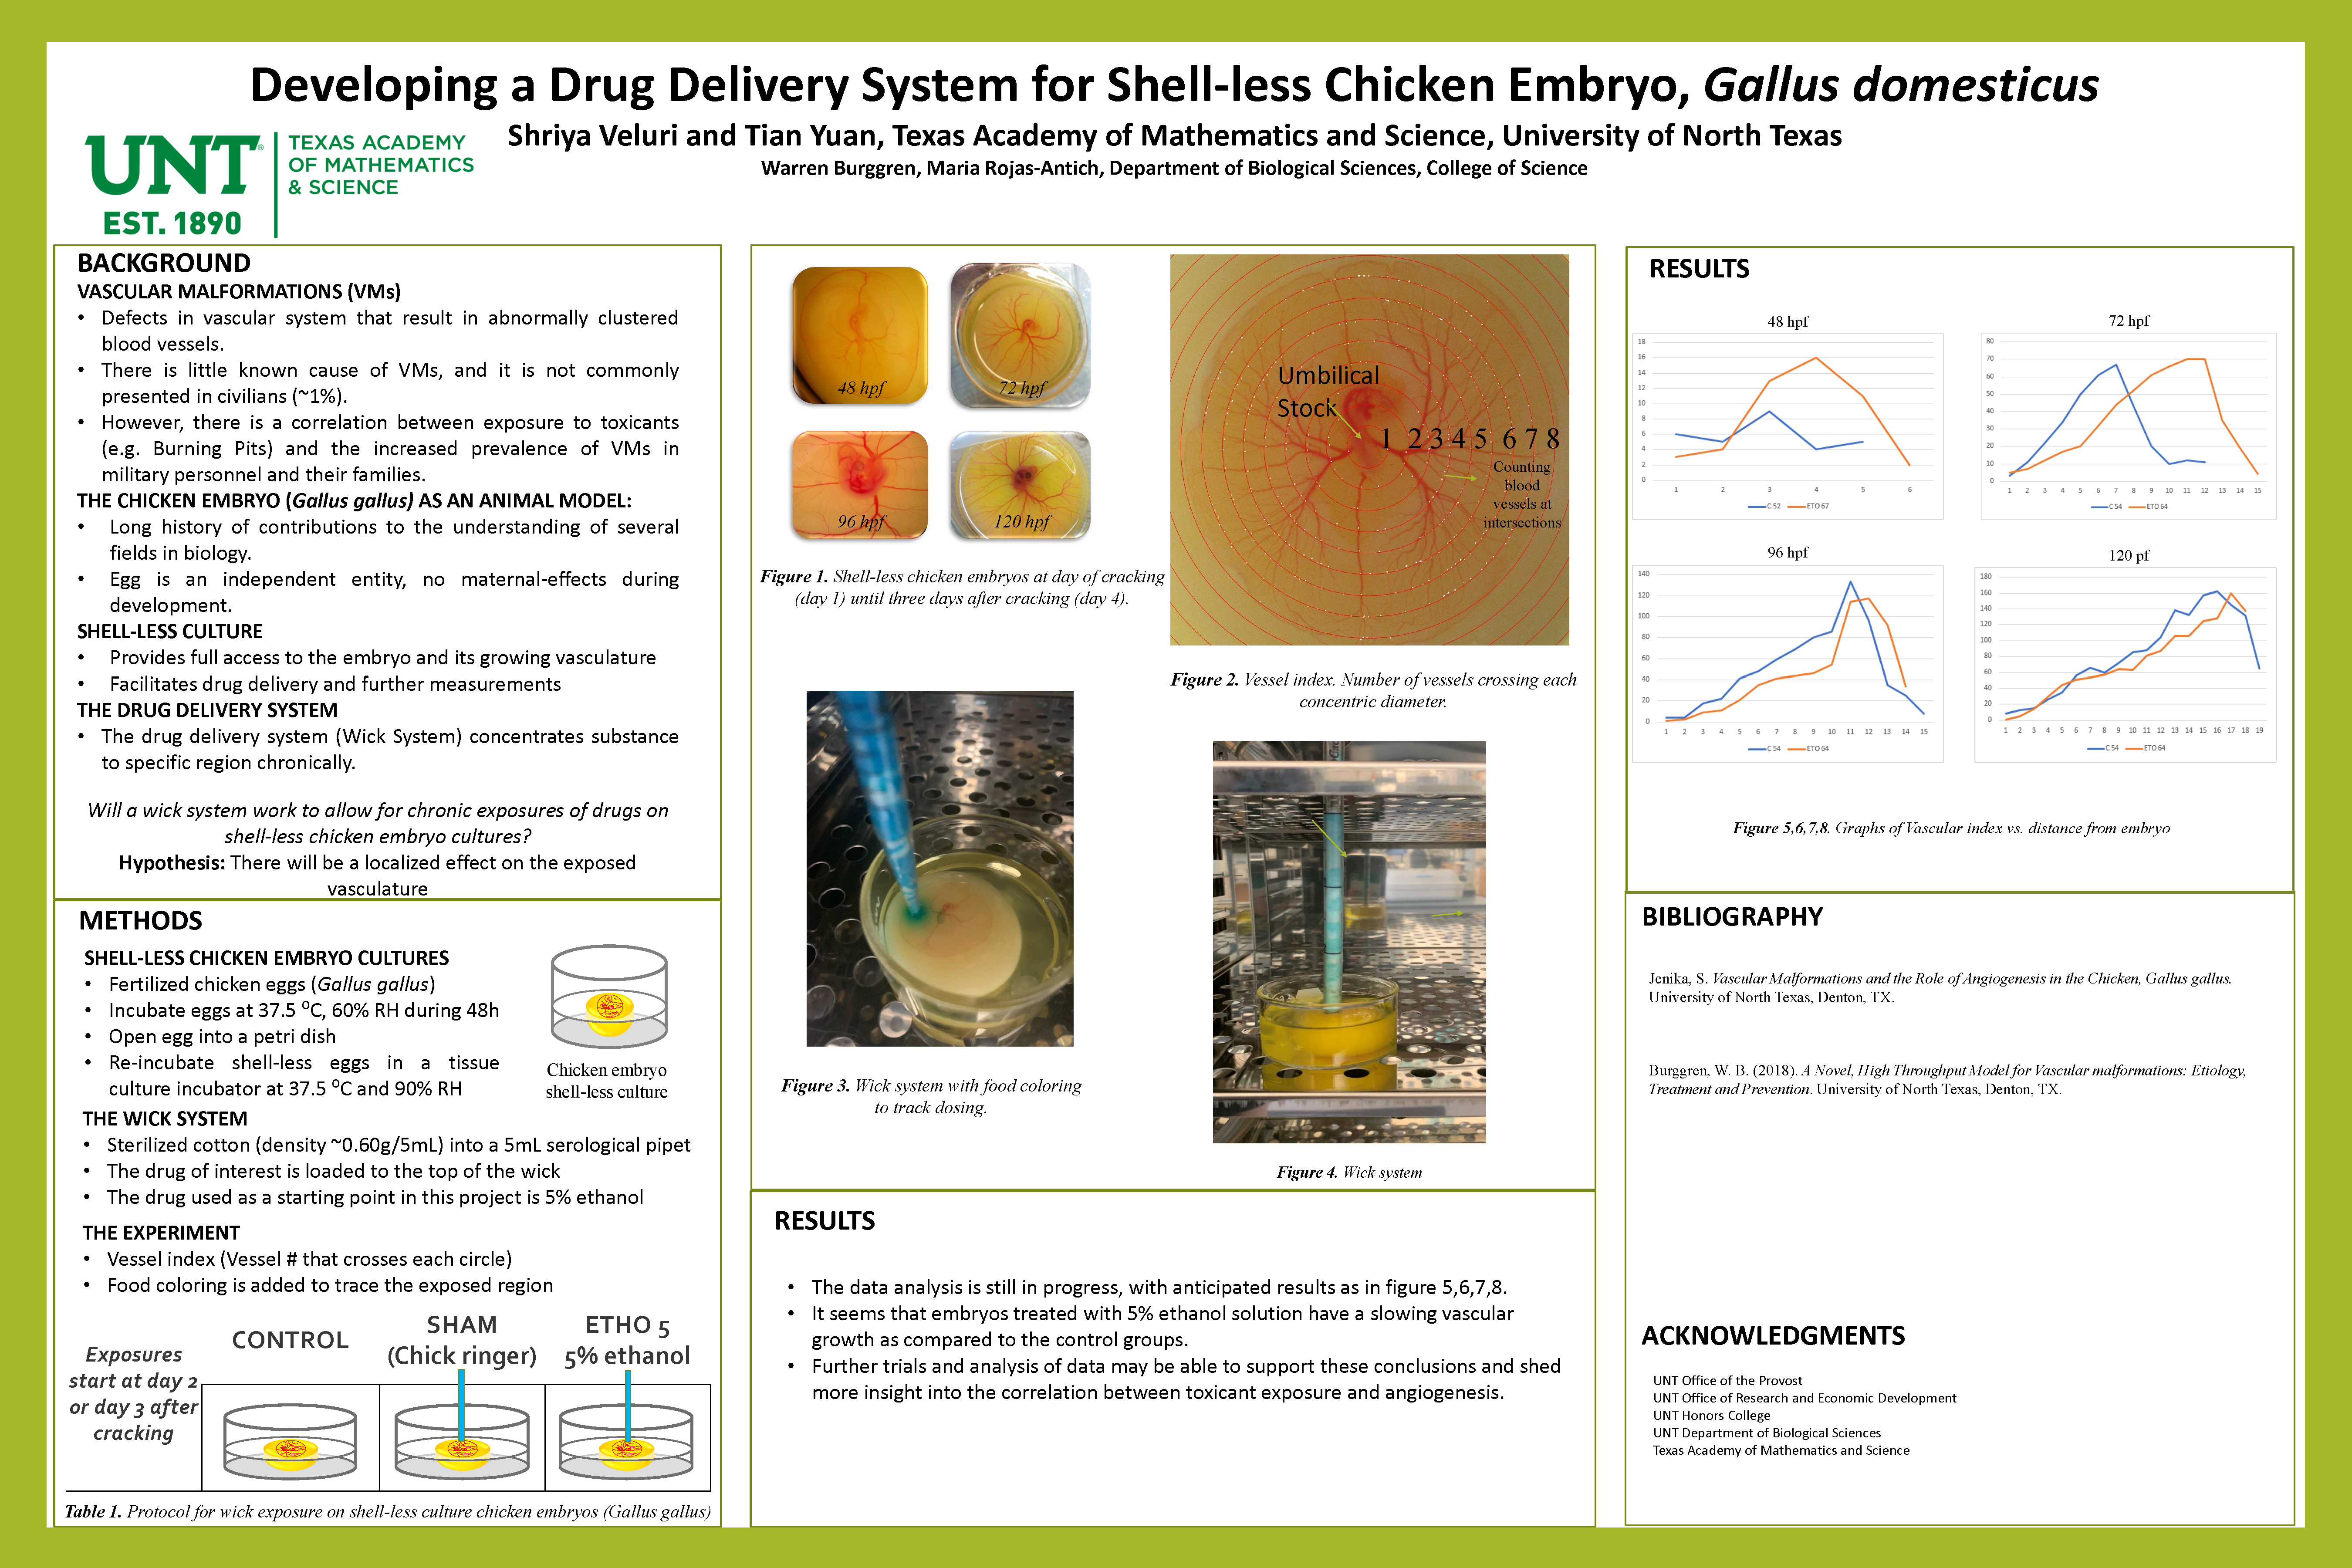 Developing a Drug Delivery System for Shell-less Chicken Embryo, Gallus domesticus